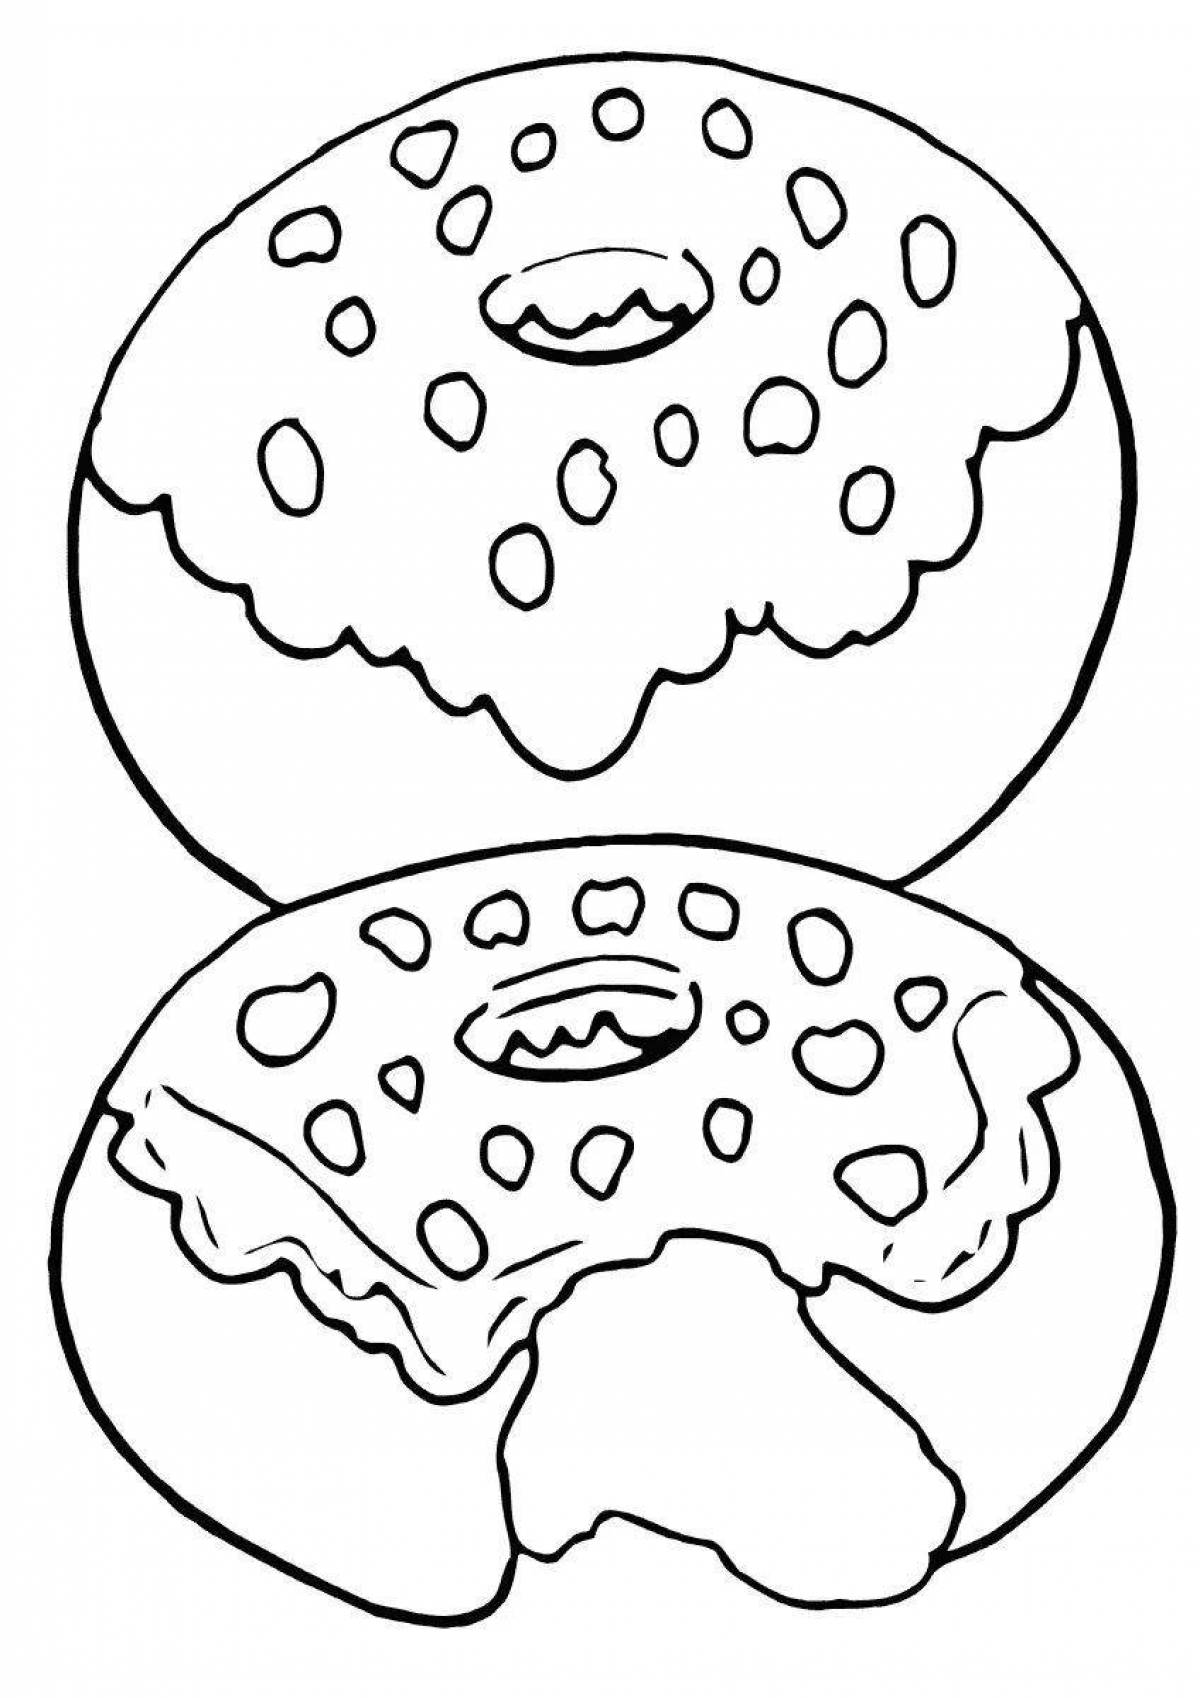 Sweet donut coloring page for girls